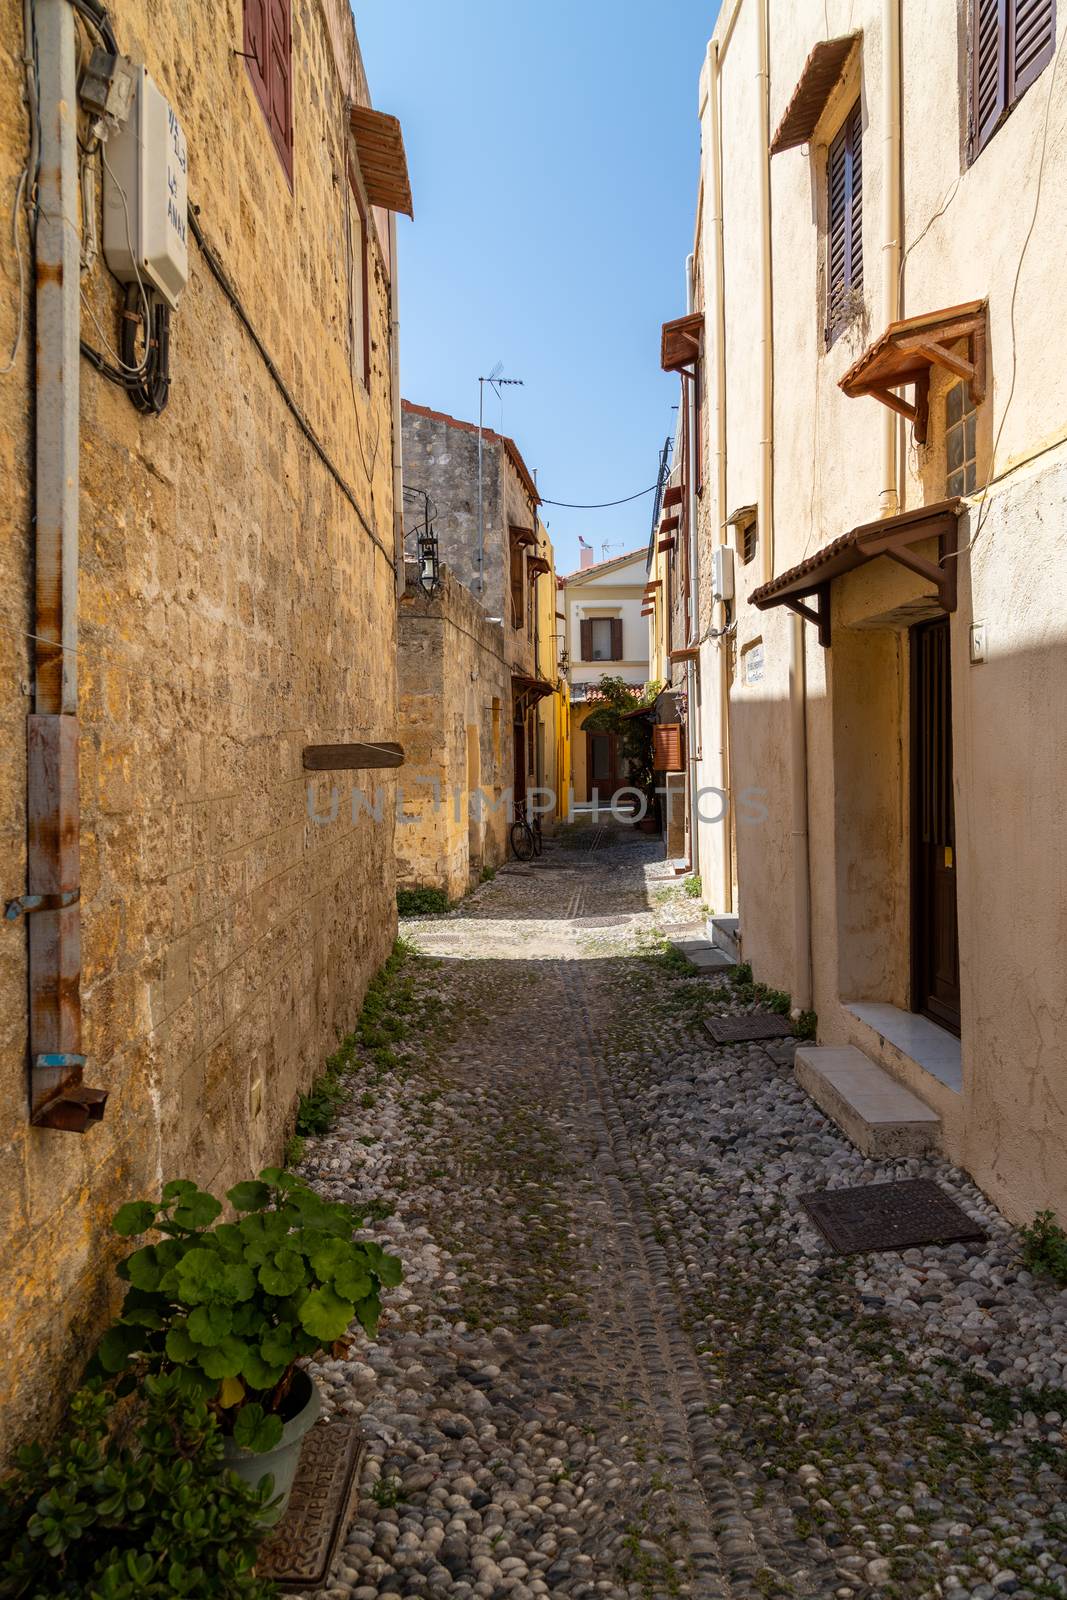 Narrow alley / lane in the old town of Rhodes city on Rhodes island, Greece